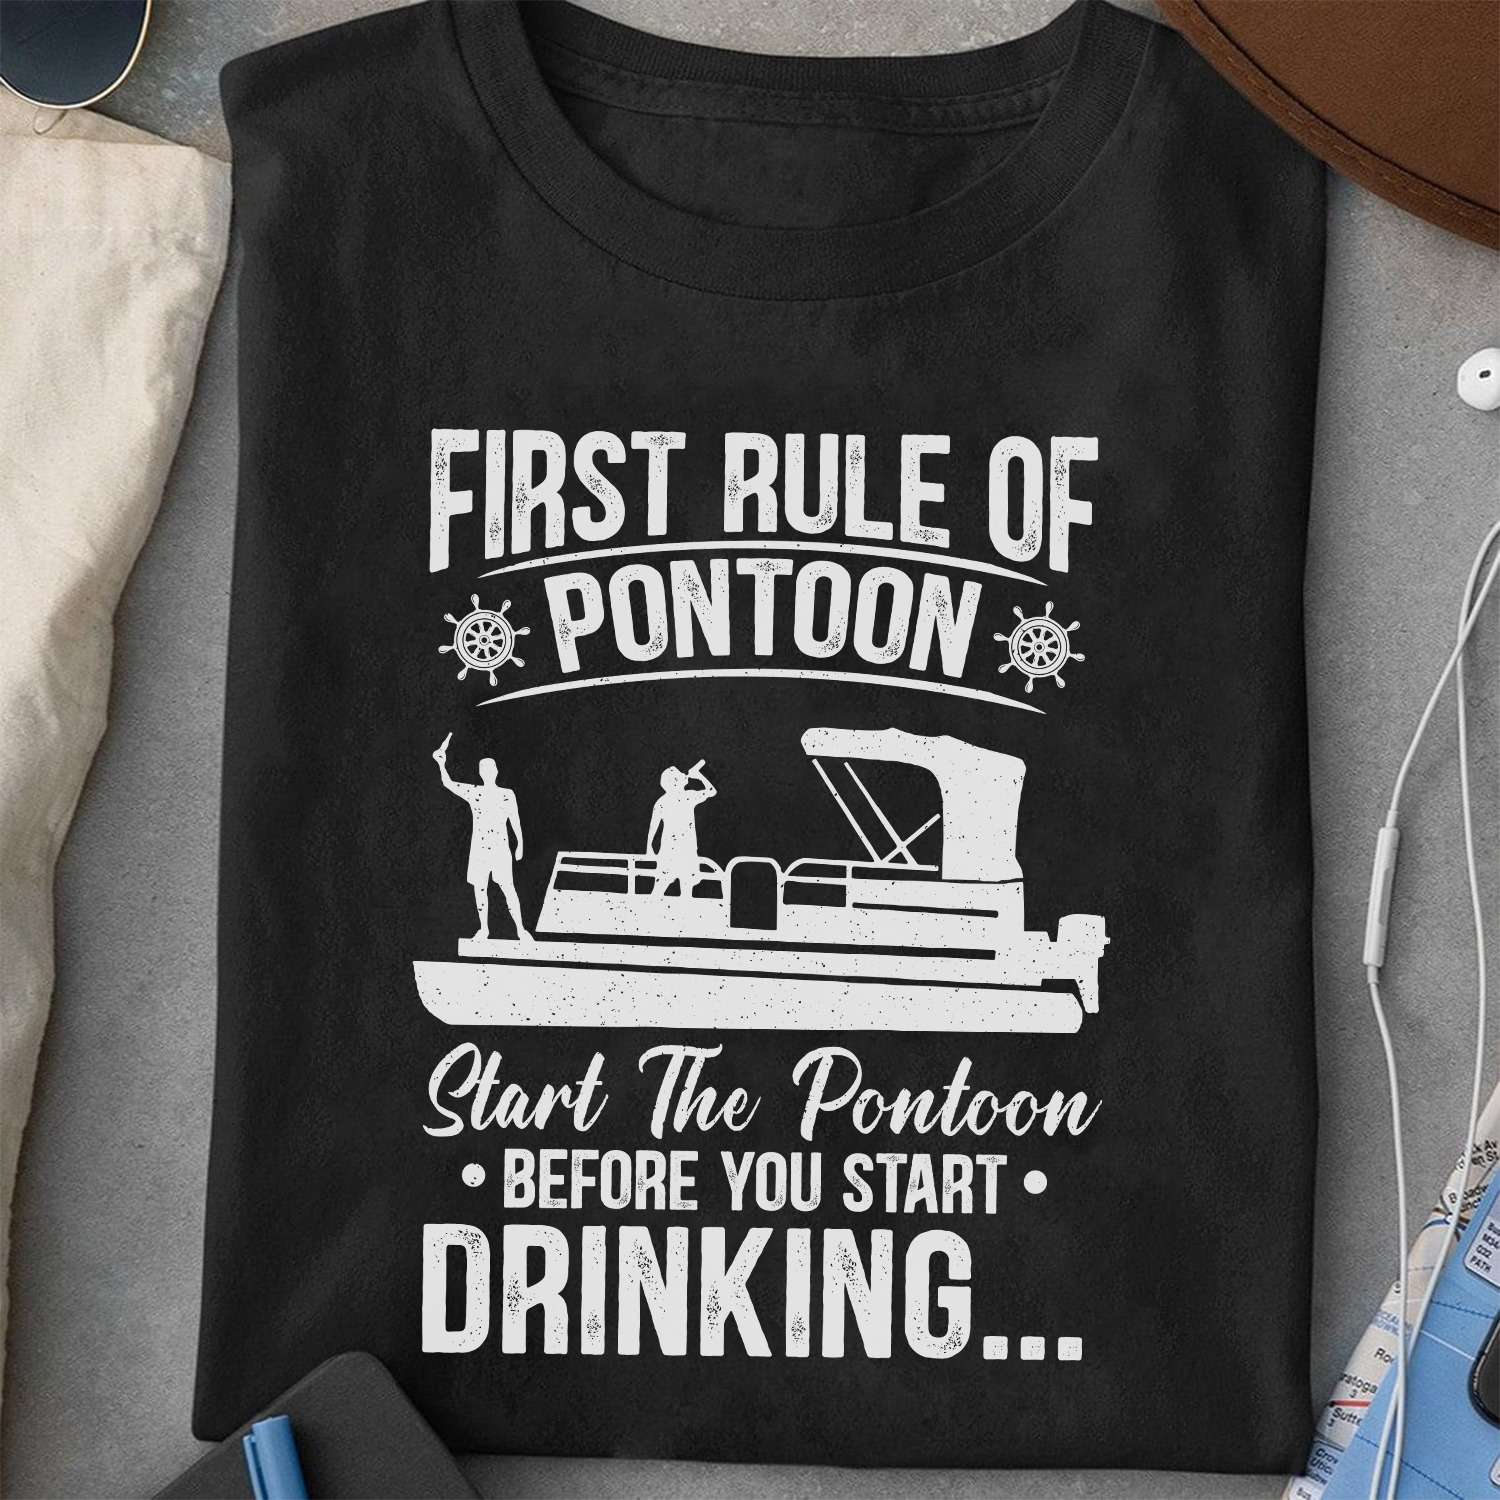 First rule of pontoon - Start the pontoon before you start drinking, drinking and pontooning